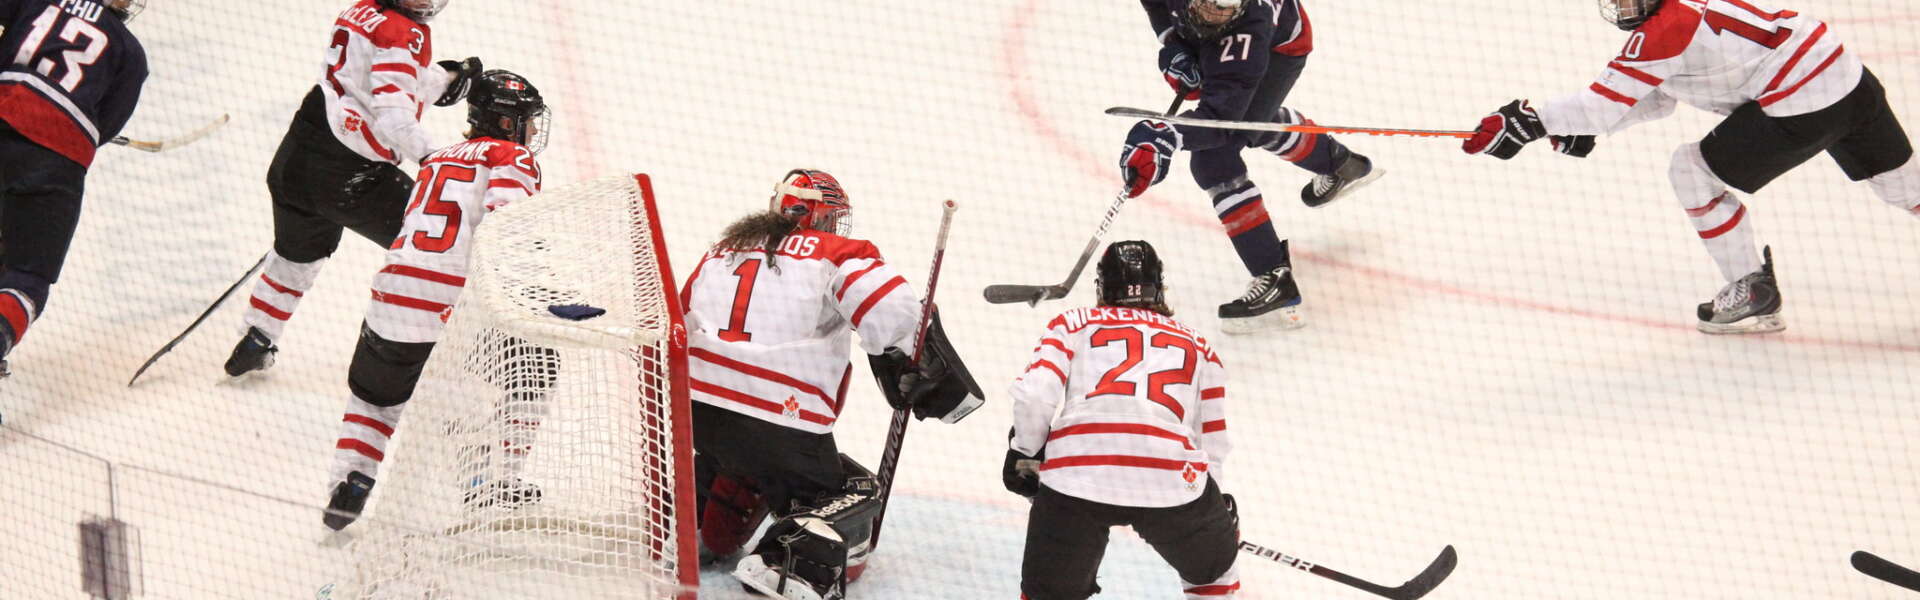 Canada's and USA's women's hockey teams play against each other at the 2010 Winter Olympics.